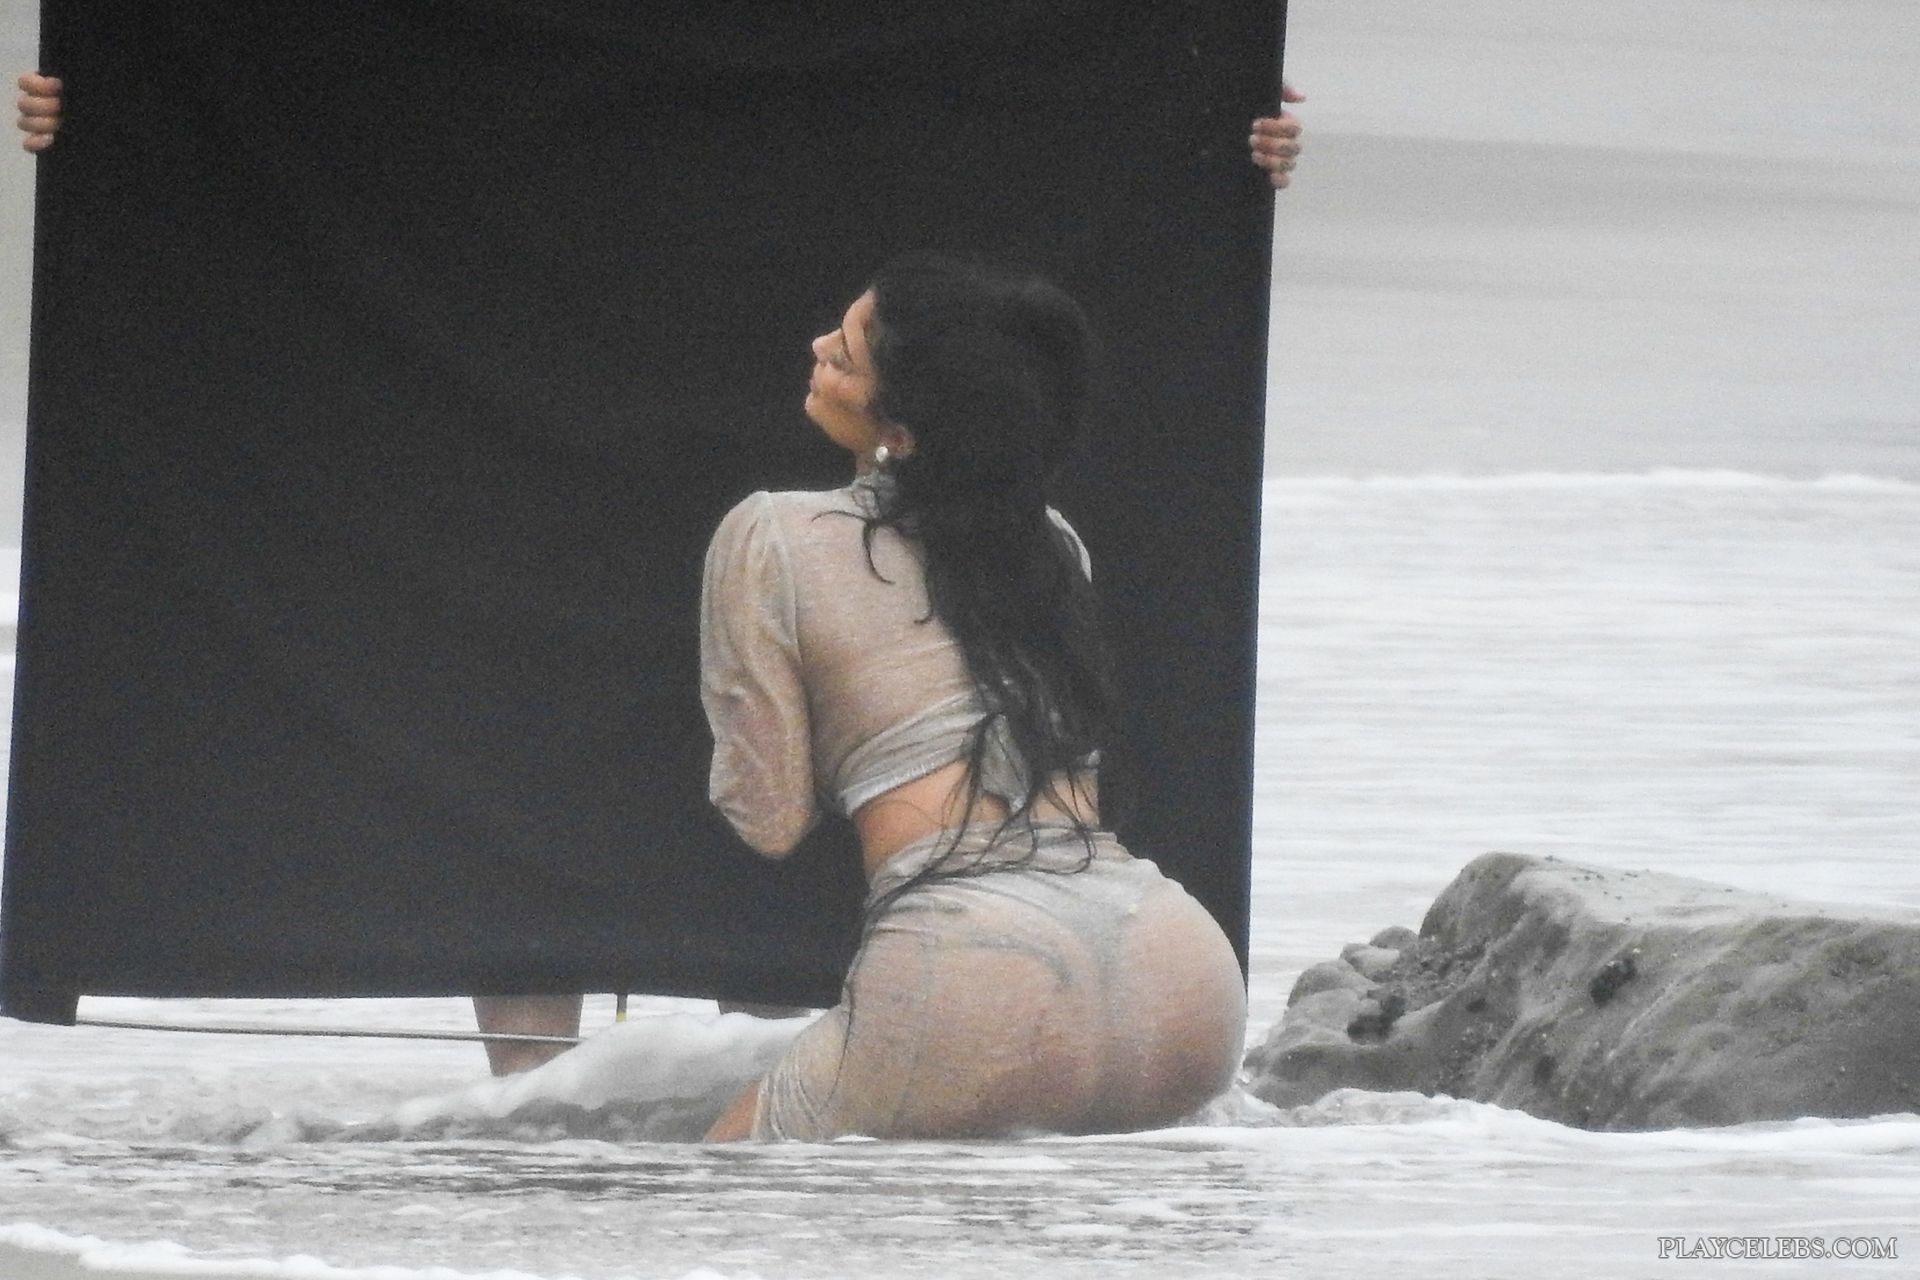 You are currently viewing Kylie Jenner Paparazzi See Through Beach Photos